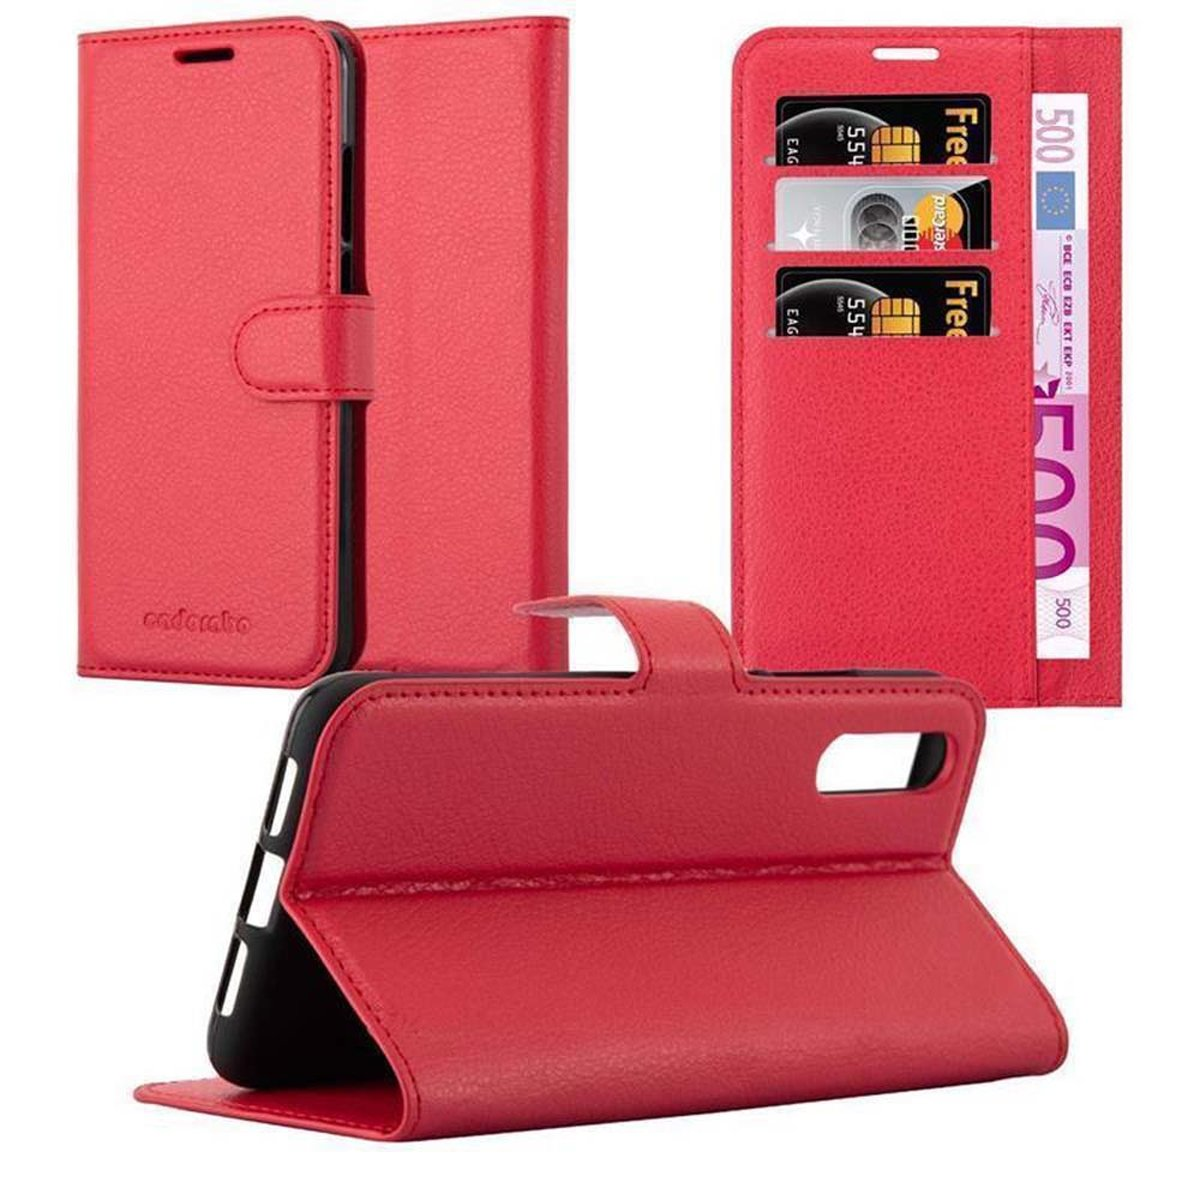 Bookcover, Standfunktion, Hülle Huawei, Book KARMIN CADORABO ROT P20,